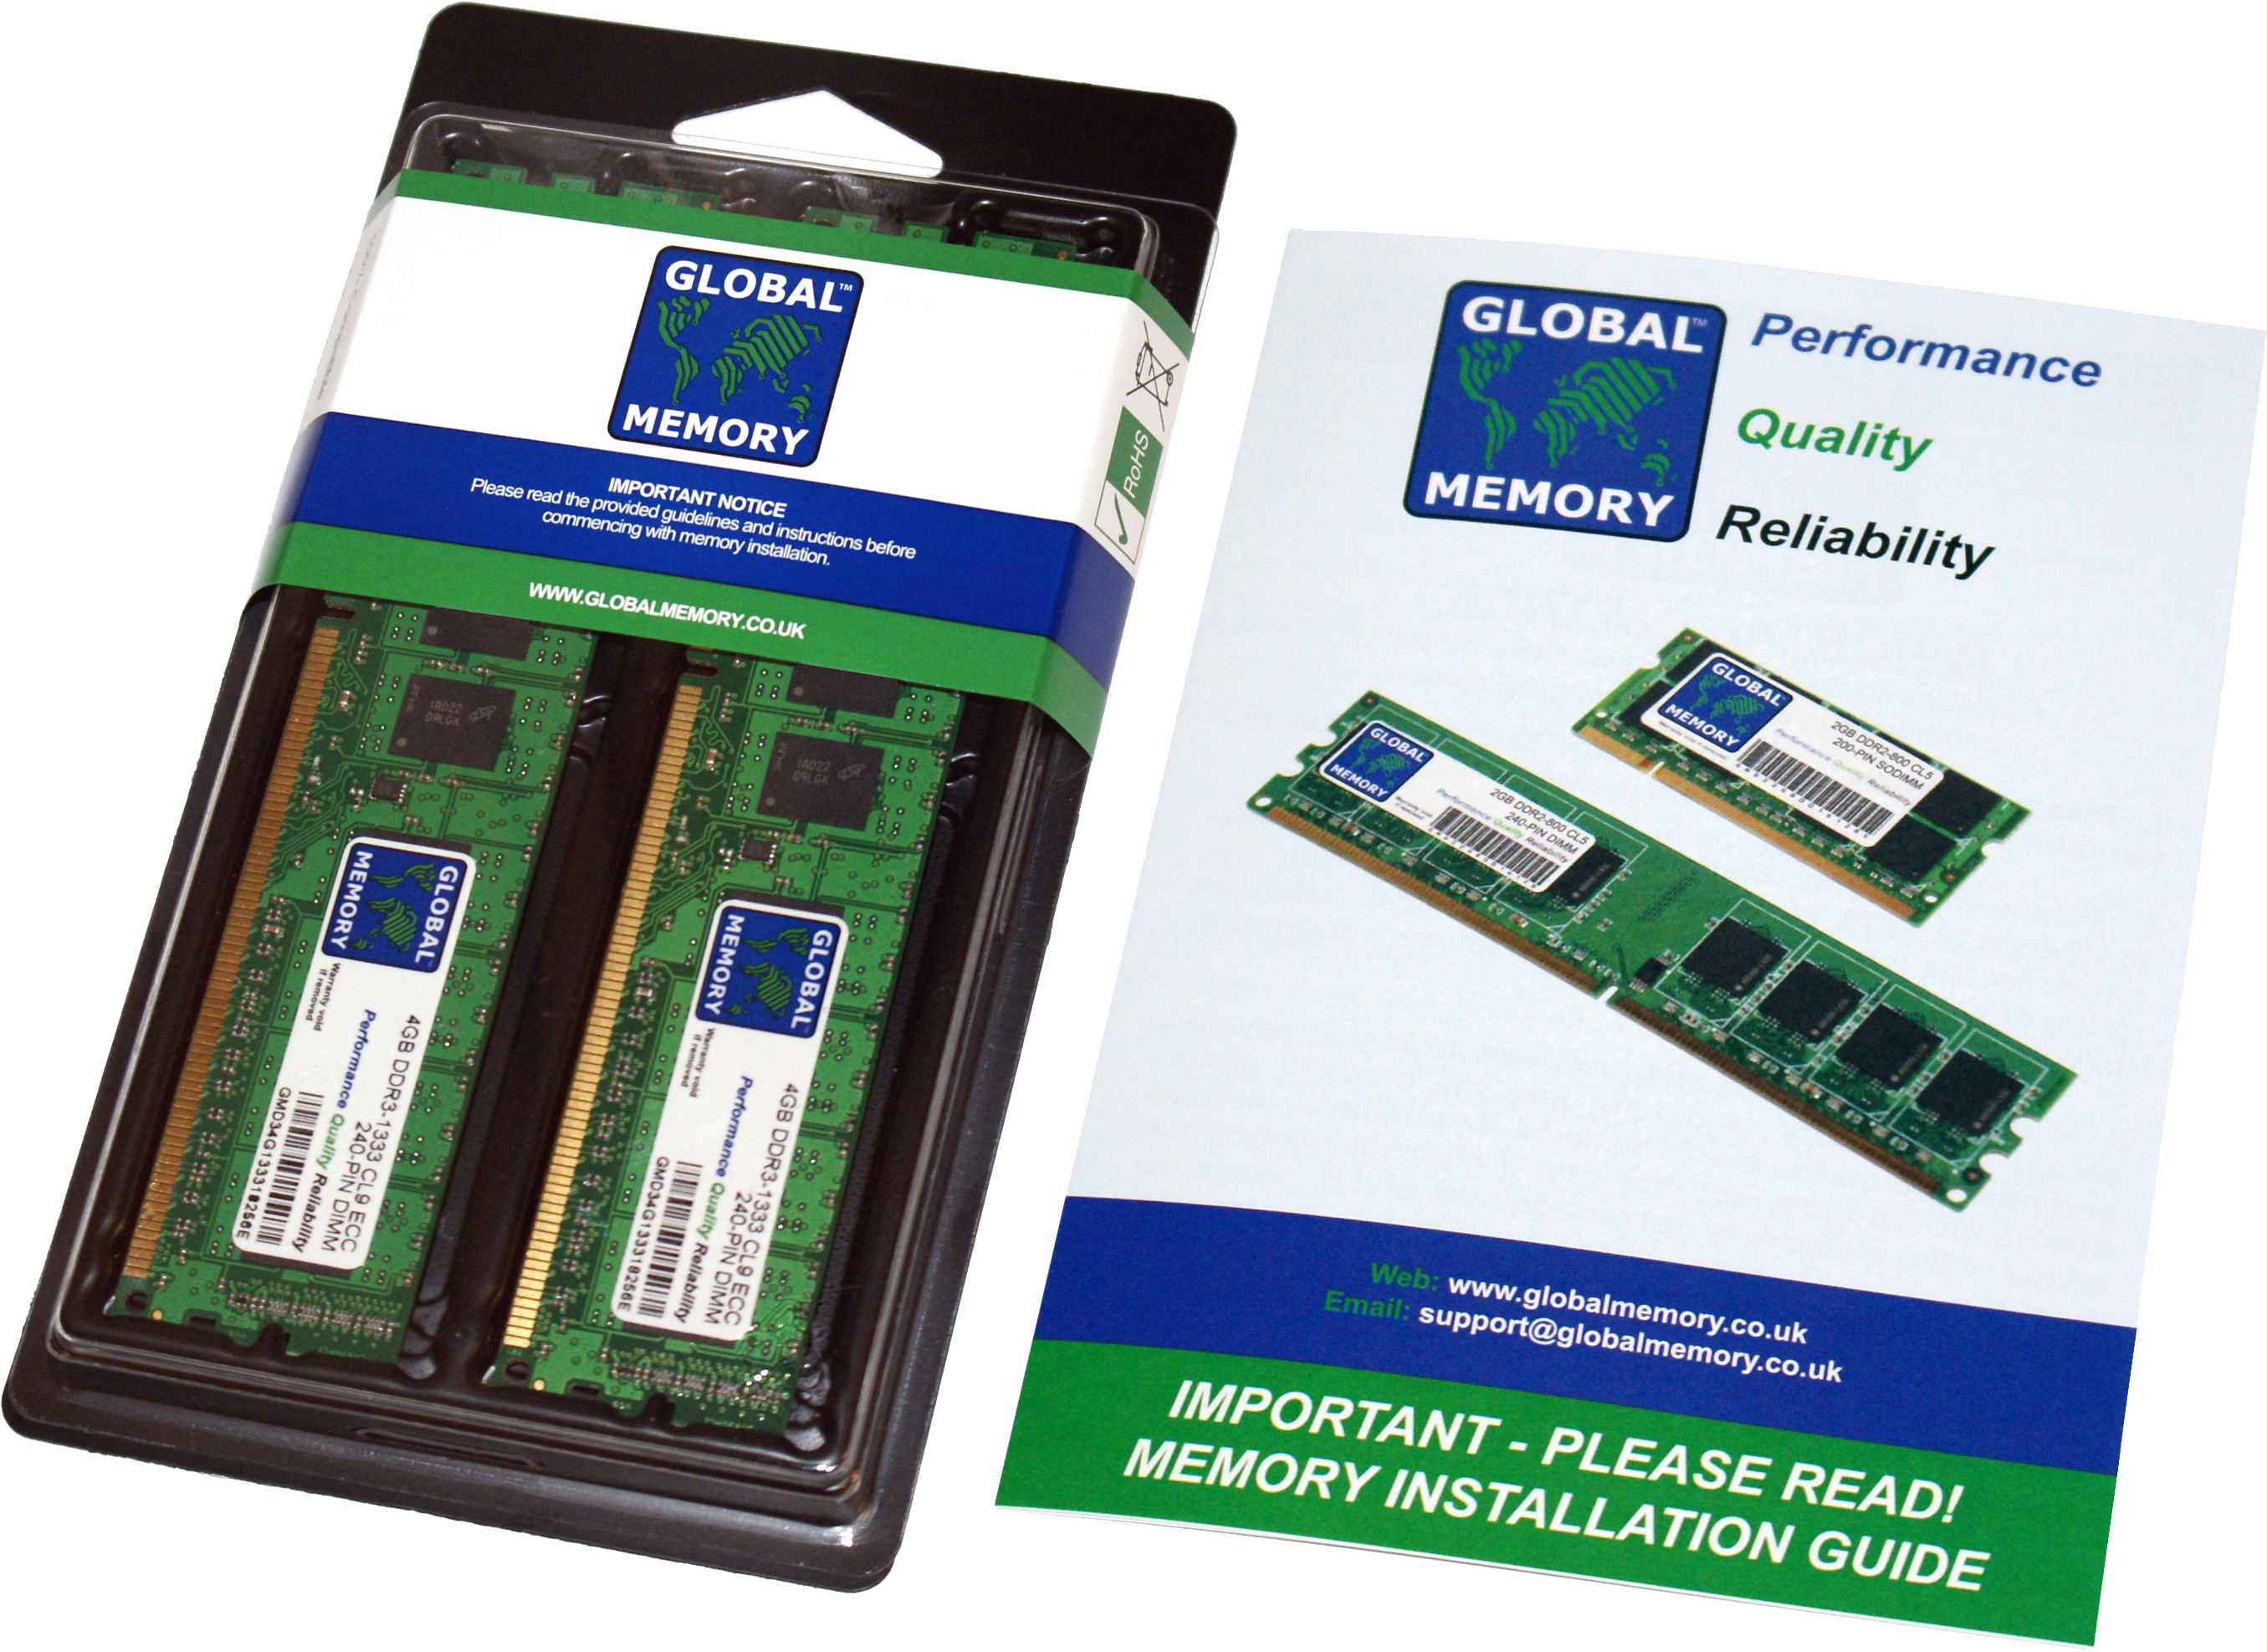 4GB (2 x 2GB) DDR3 1600MHz PC3-12800 240-PIN ECC DIMM (UDIMM) MEMORY RAM KIT FOR SERVERS/WORKSTATIONS/MOTHERBOARDS